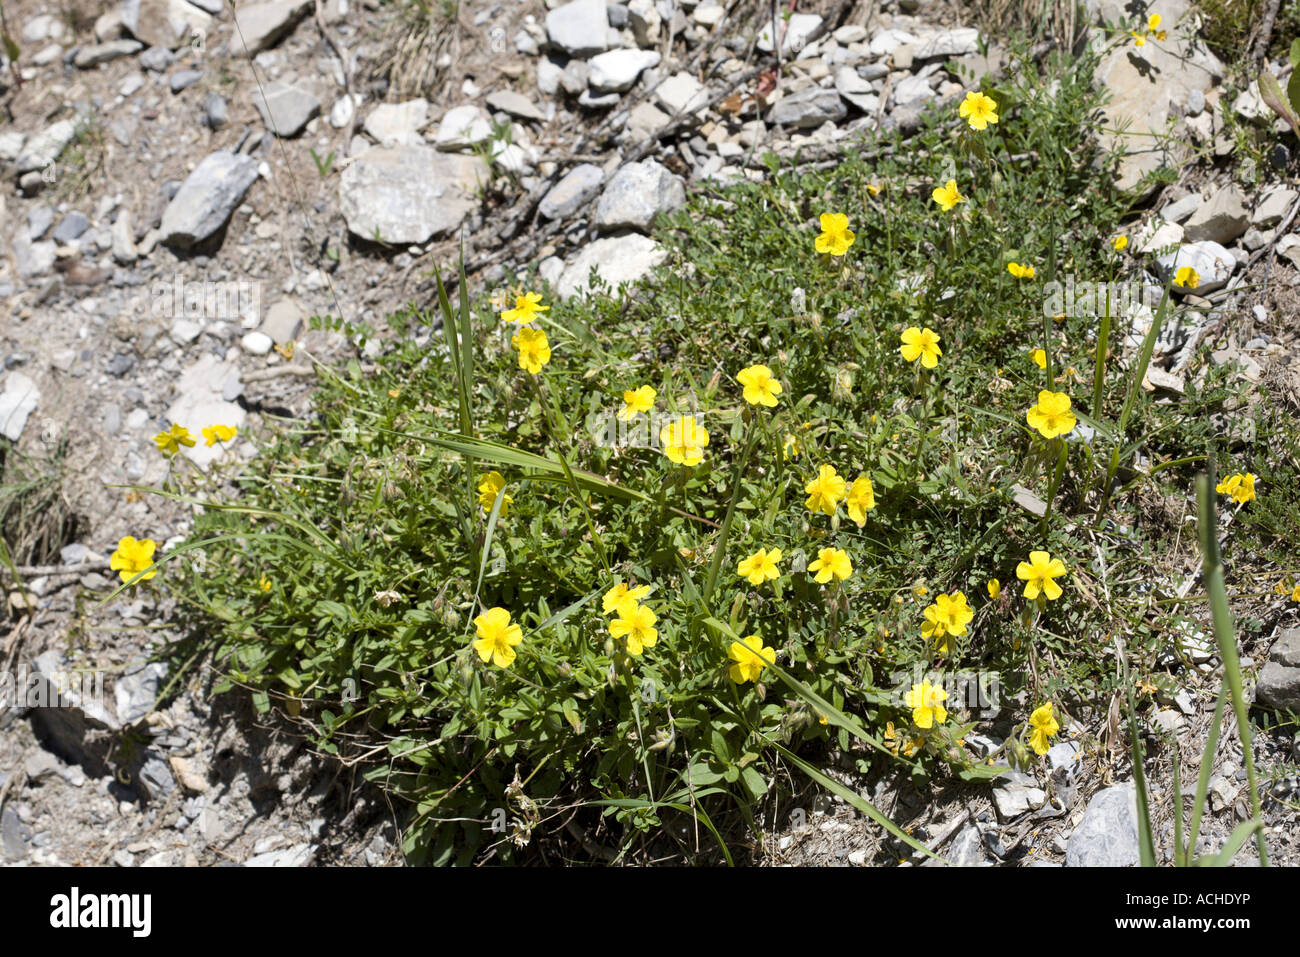 Rockrose (Helianthemum) with yellow flowers in Les Orres, Hautes Alpes, Provence, France Stock Photo